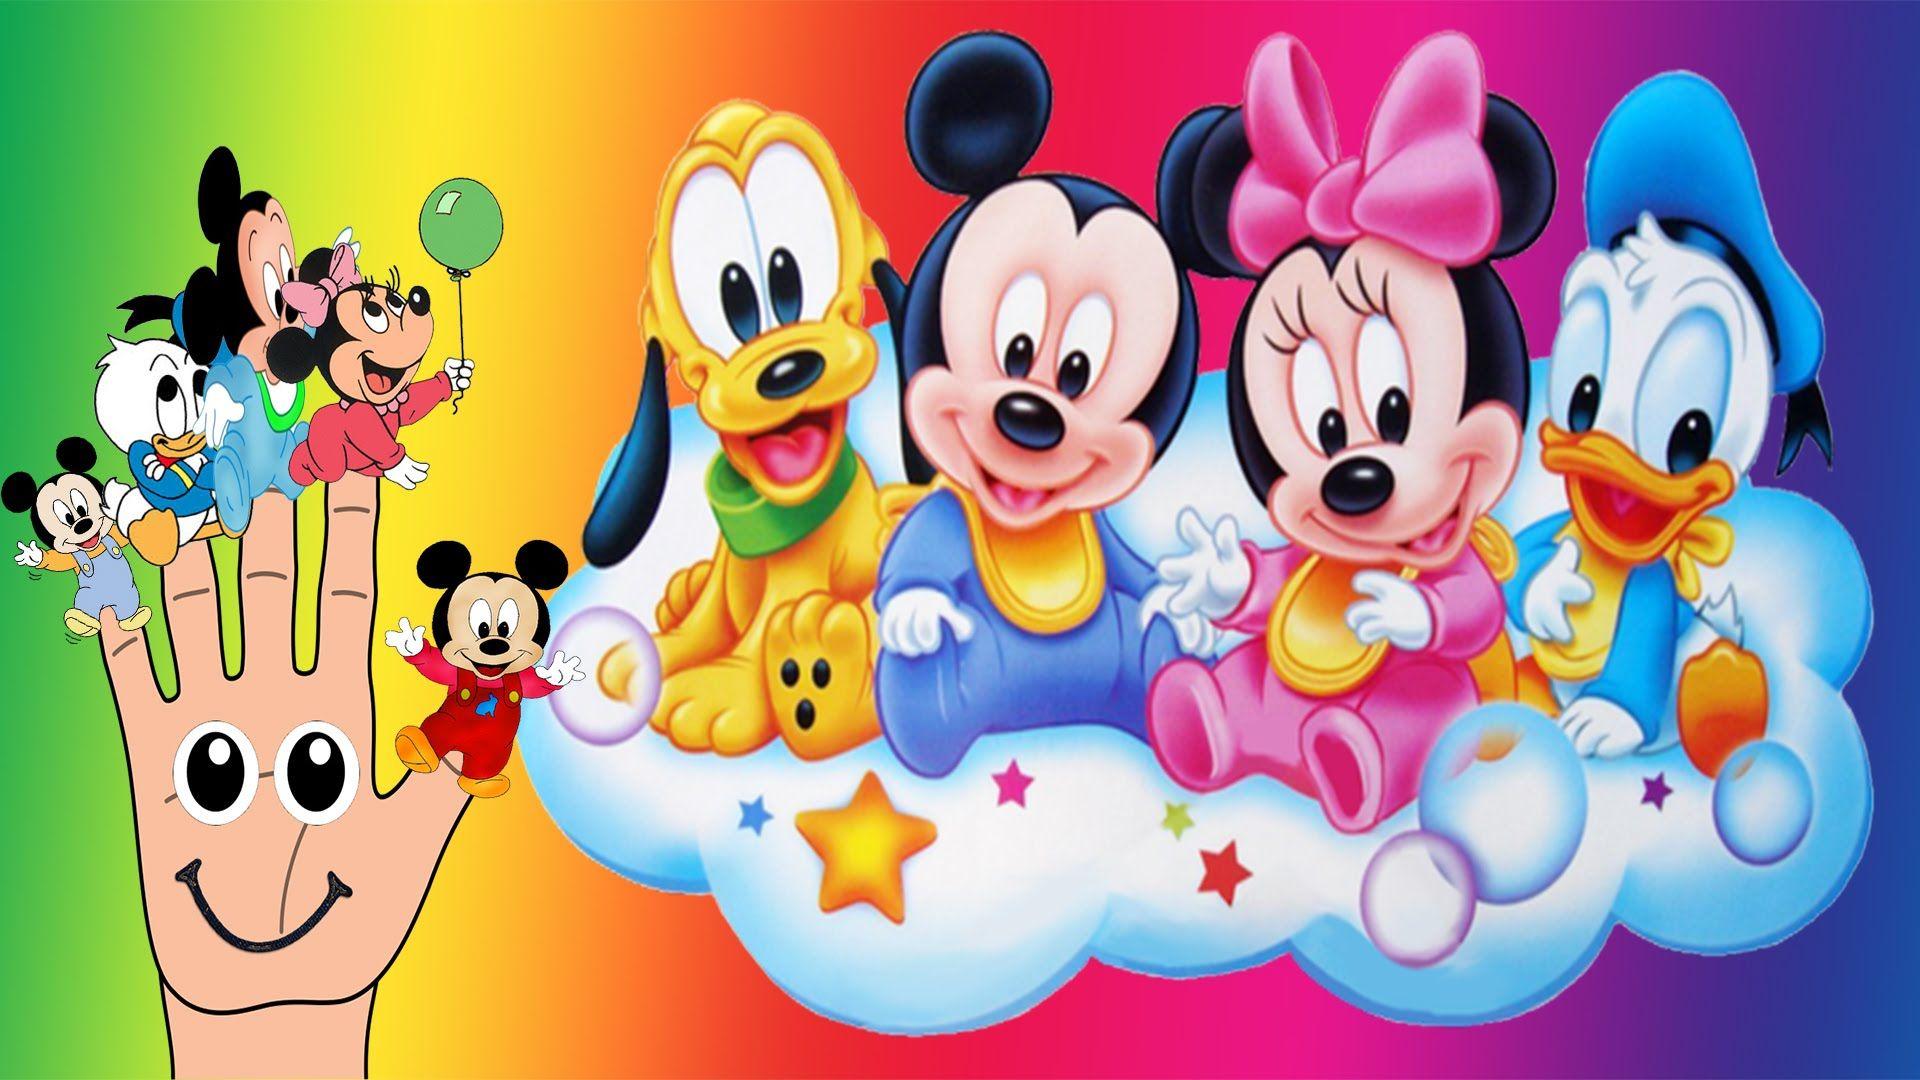 Mickey Mouse Clubhouse Wallpapers - Wallpaper Cave
 Cute Baby Mickey Mouse Drawings